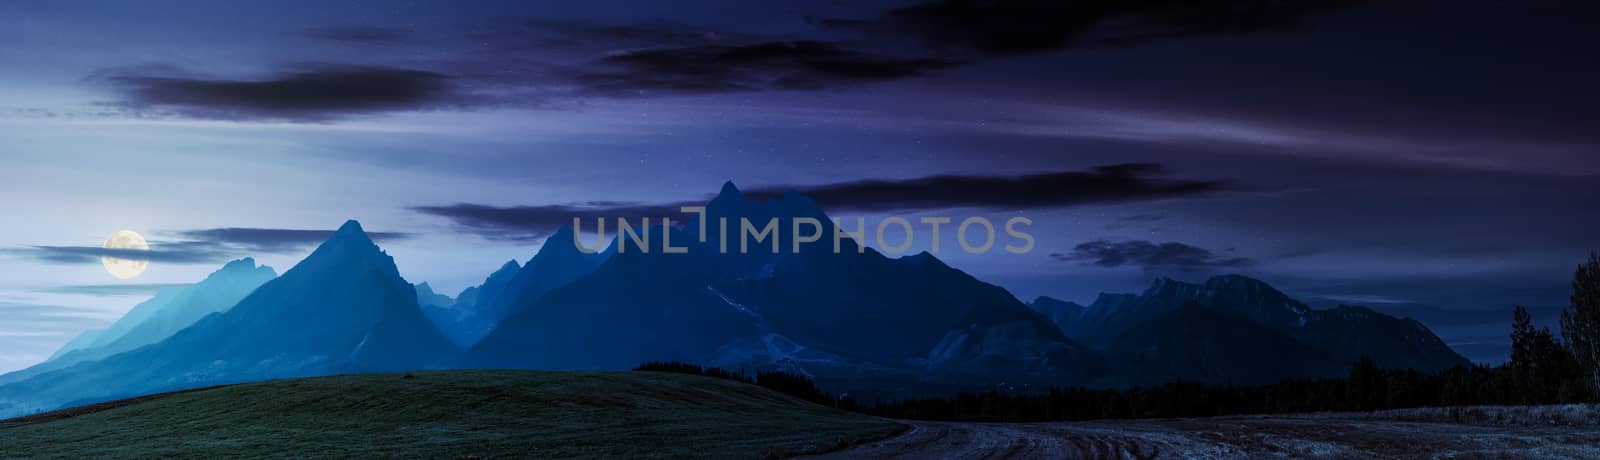 rural fields near Tatra Mountains in summer at night. beautiful panorama of agricultural area. gorgeous mountain ridge with high rocky peaks